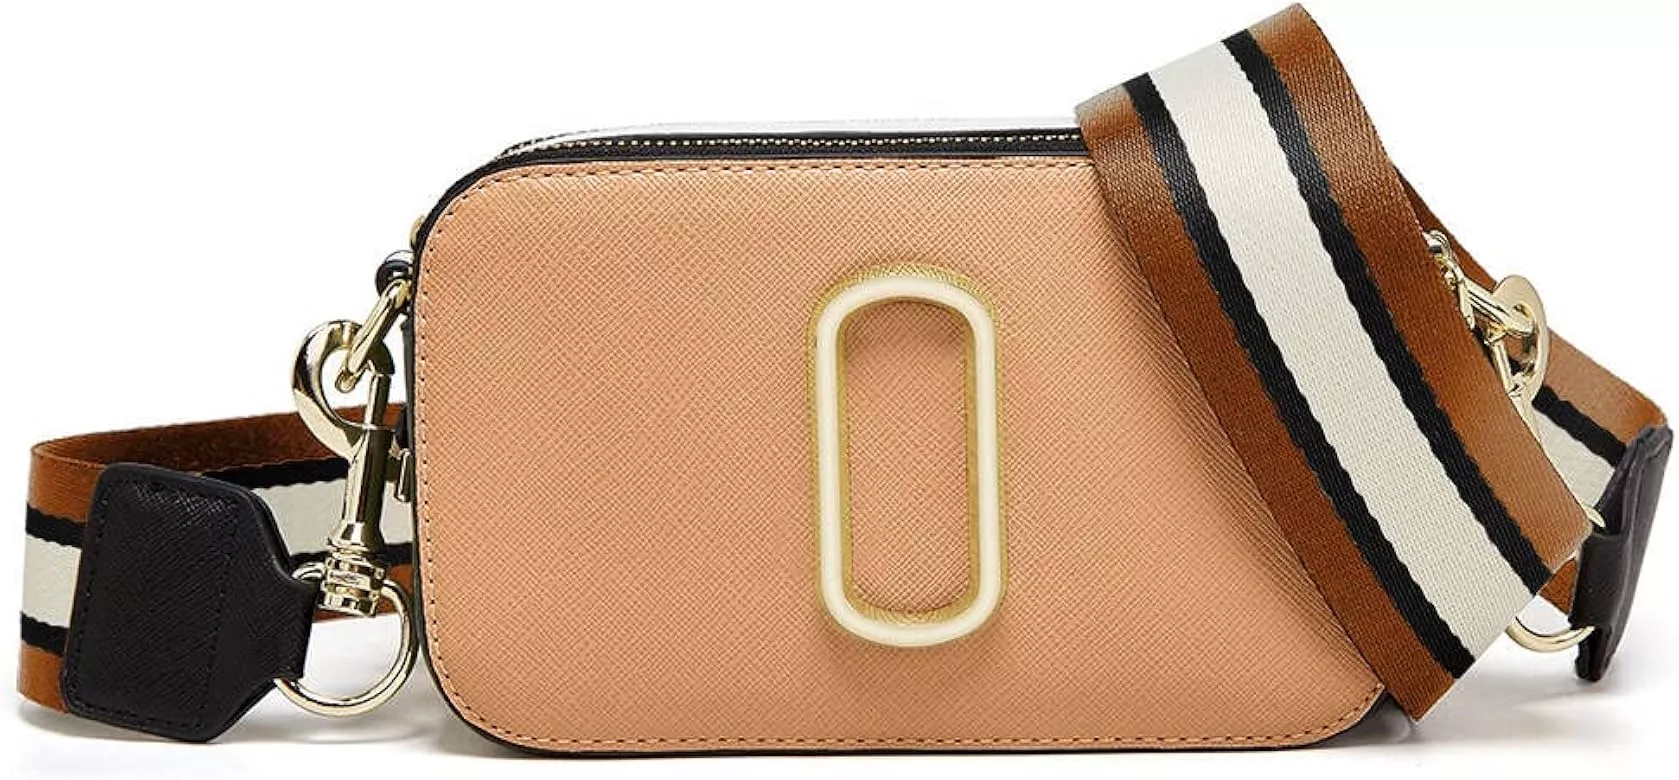 The Best Marc Jacobs Snapshot Bag Dupe From $10 - TheBestDupes